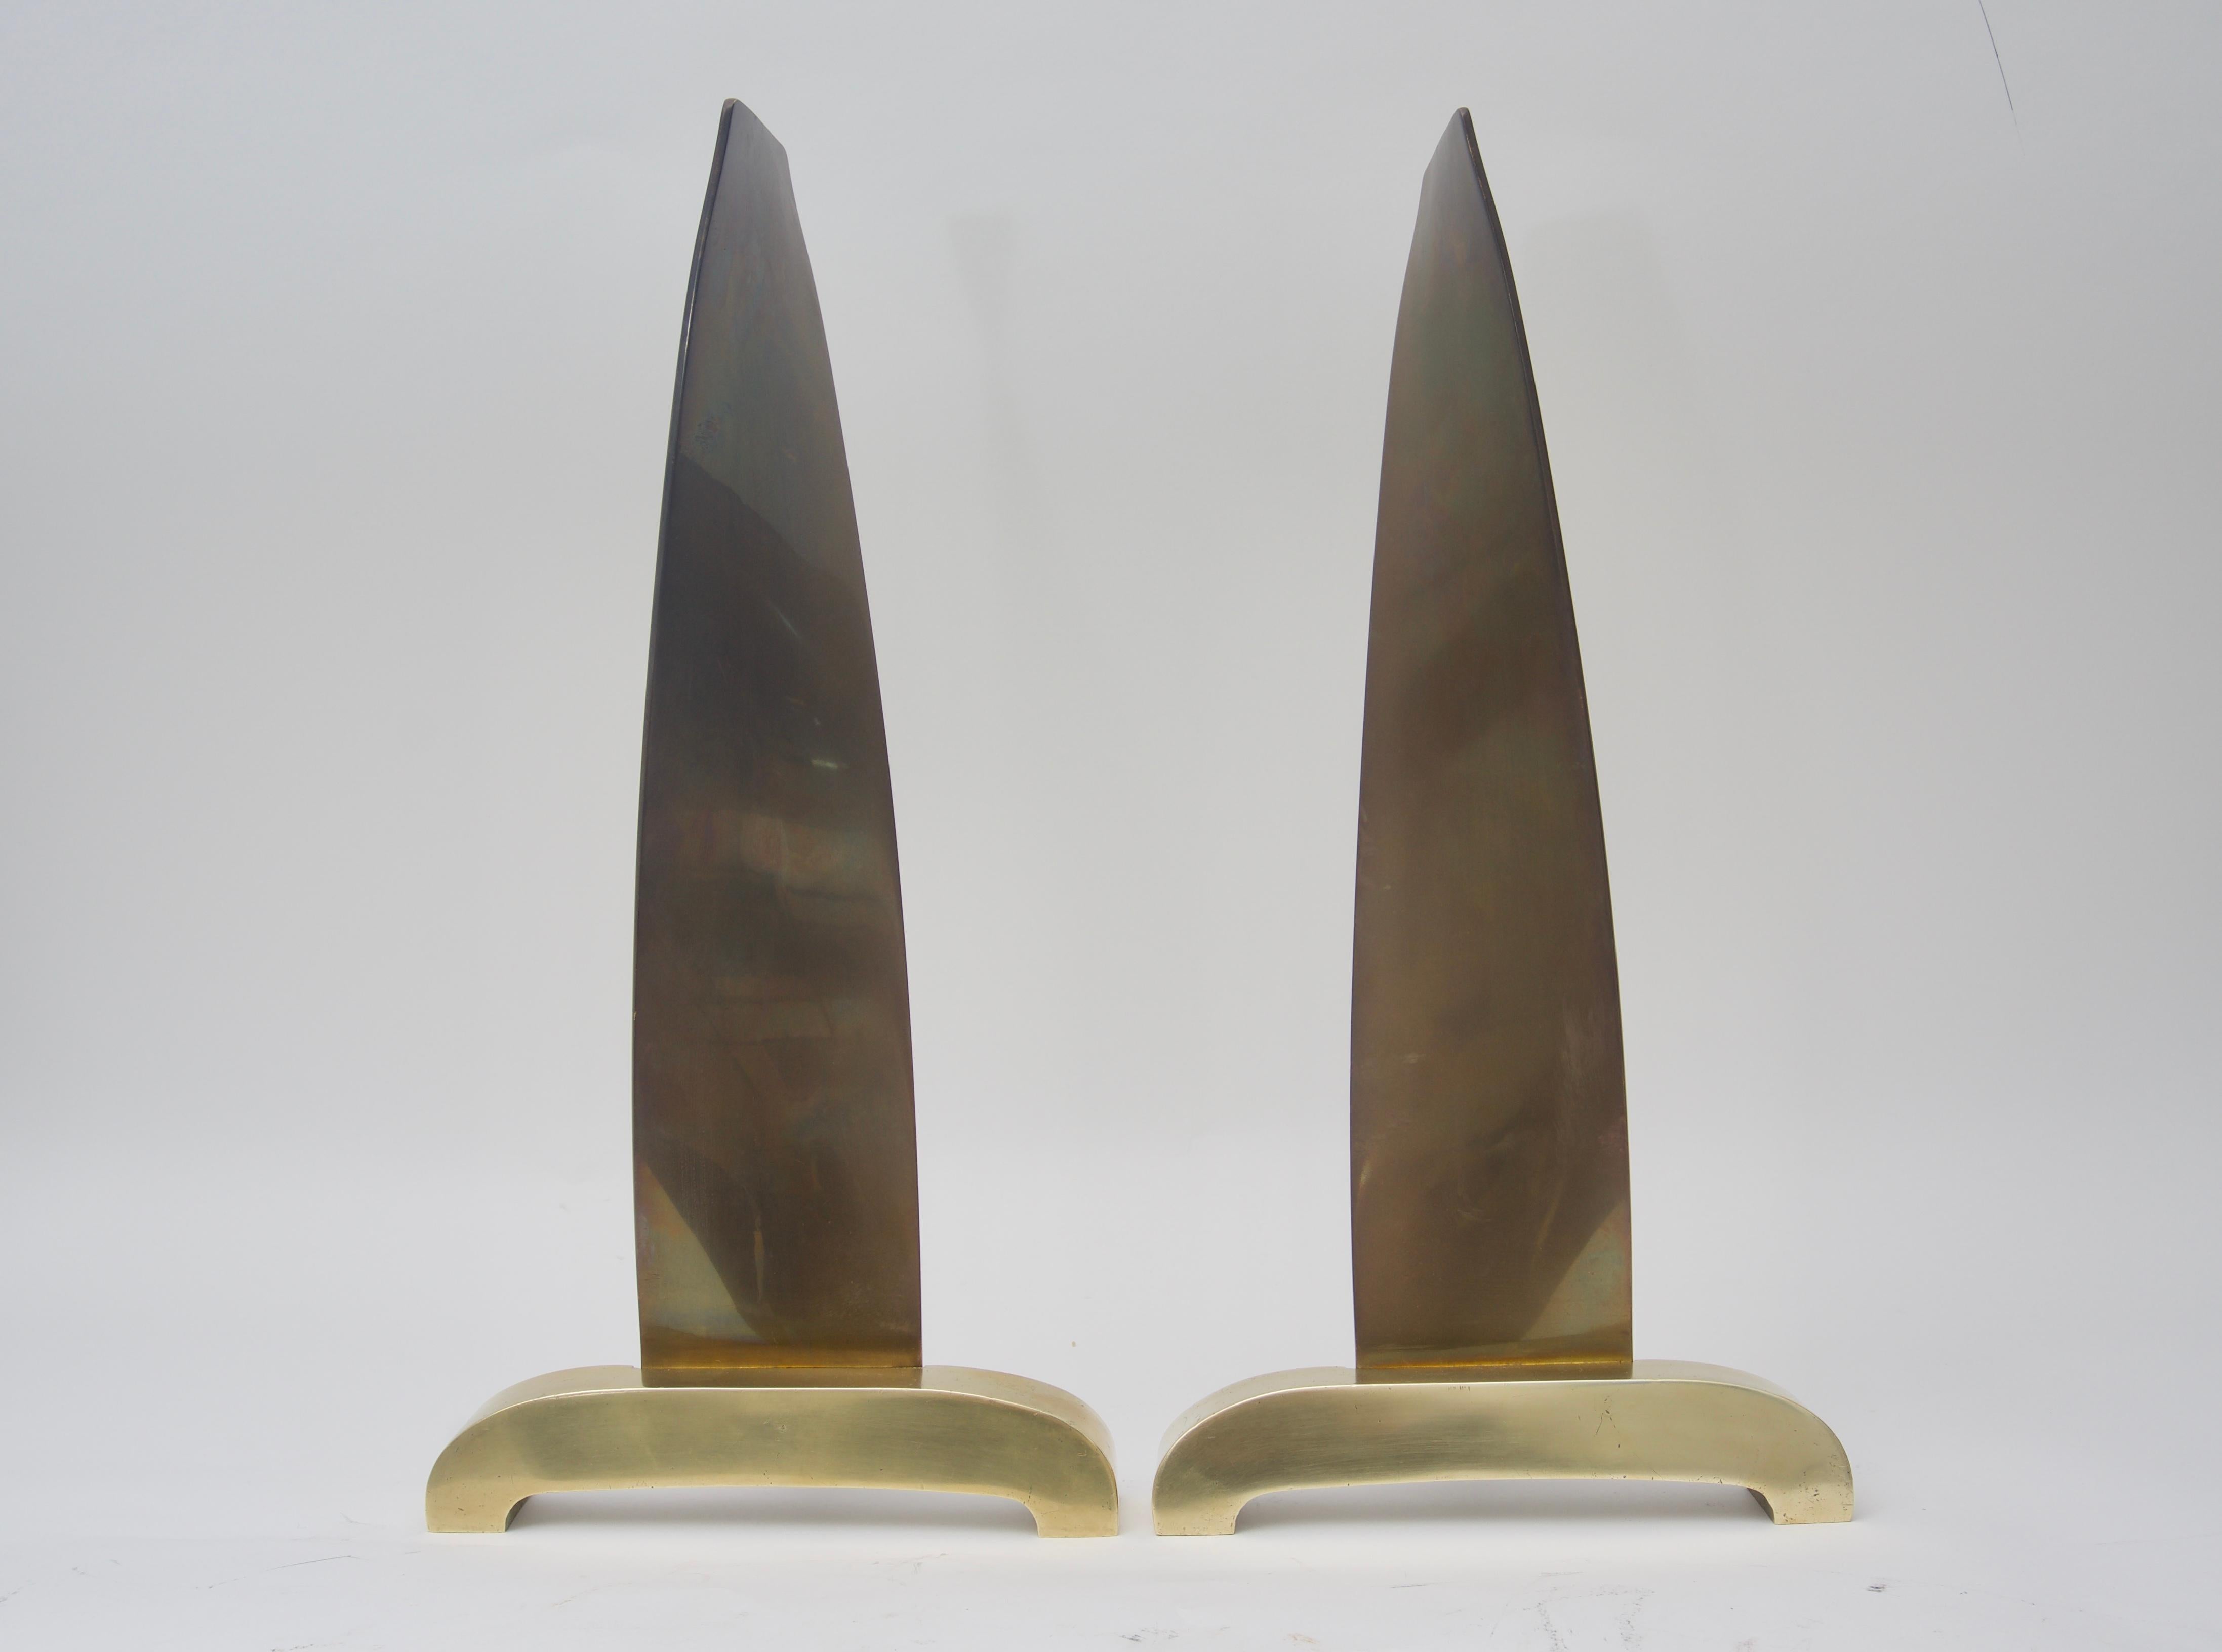 This stylish and chic set of brass andirons are by the Mid-Century Modern designer Donald Deskey and they date to the 1950s. Here Deskey has put a modern twist with a stylized flame-form and the piece is in a satin and antique finish.

Note: The